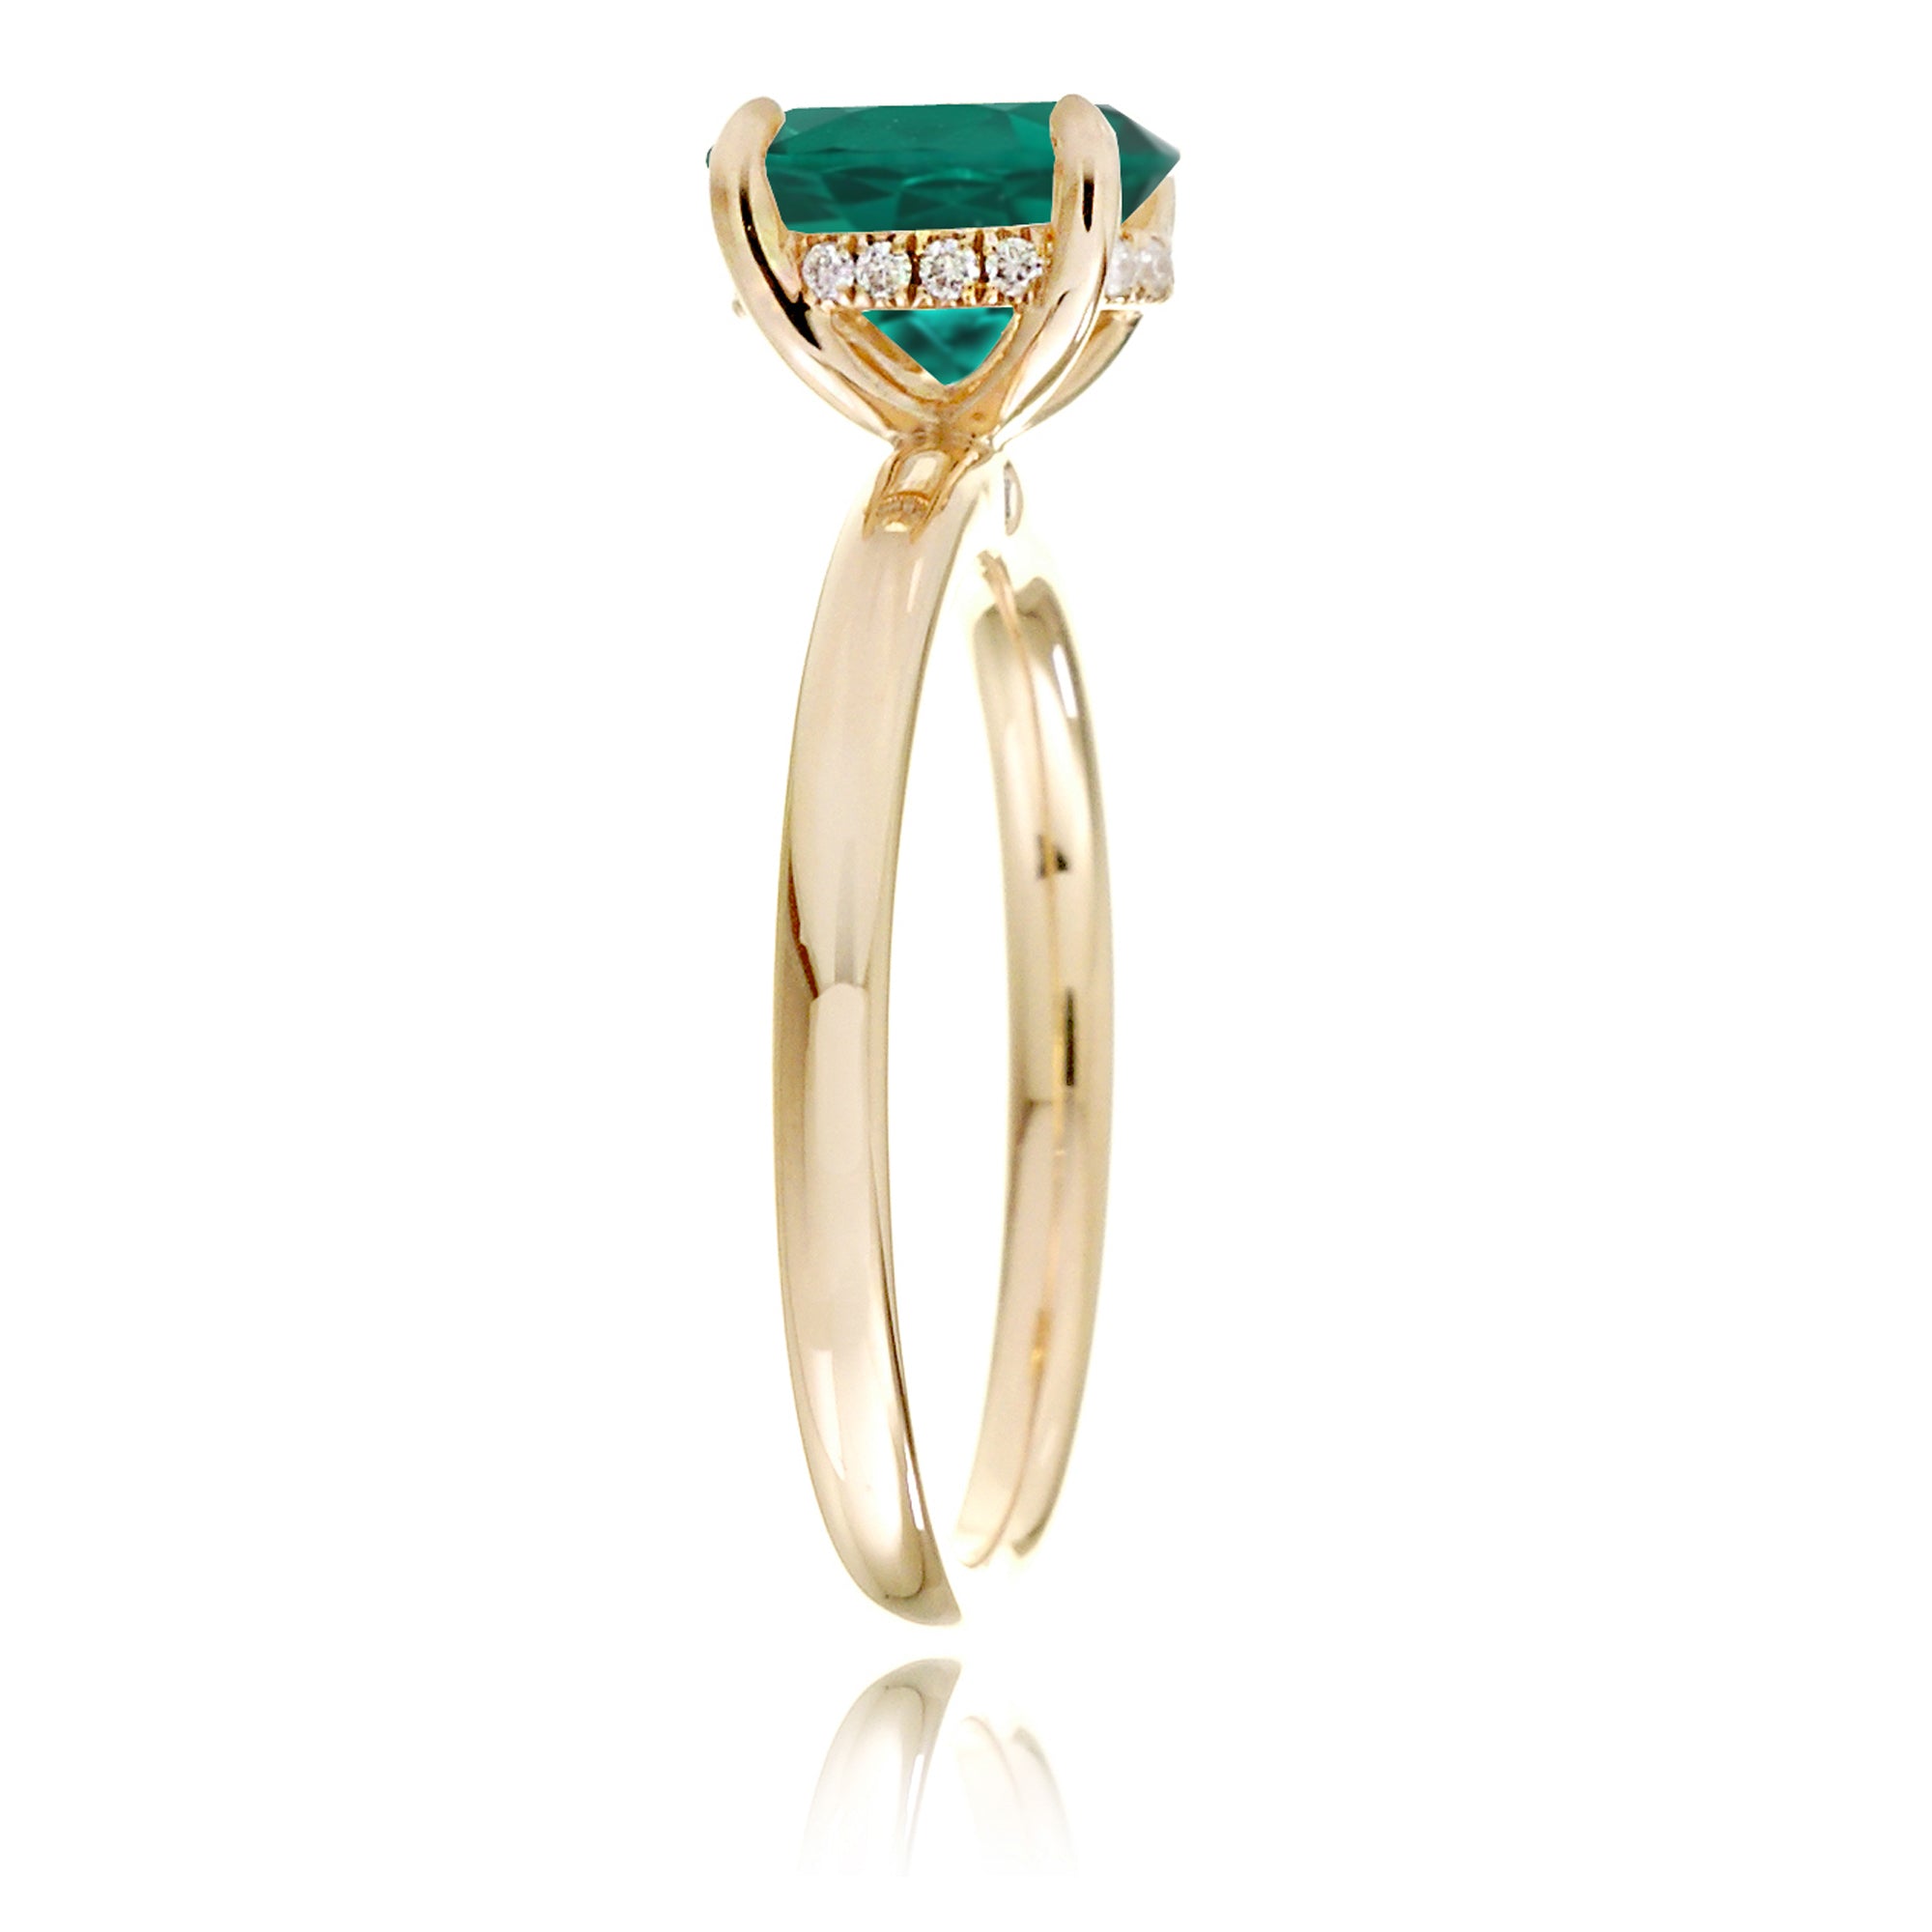 Oval cut green emerald ring with diamond hidden halo on yellow gold